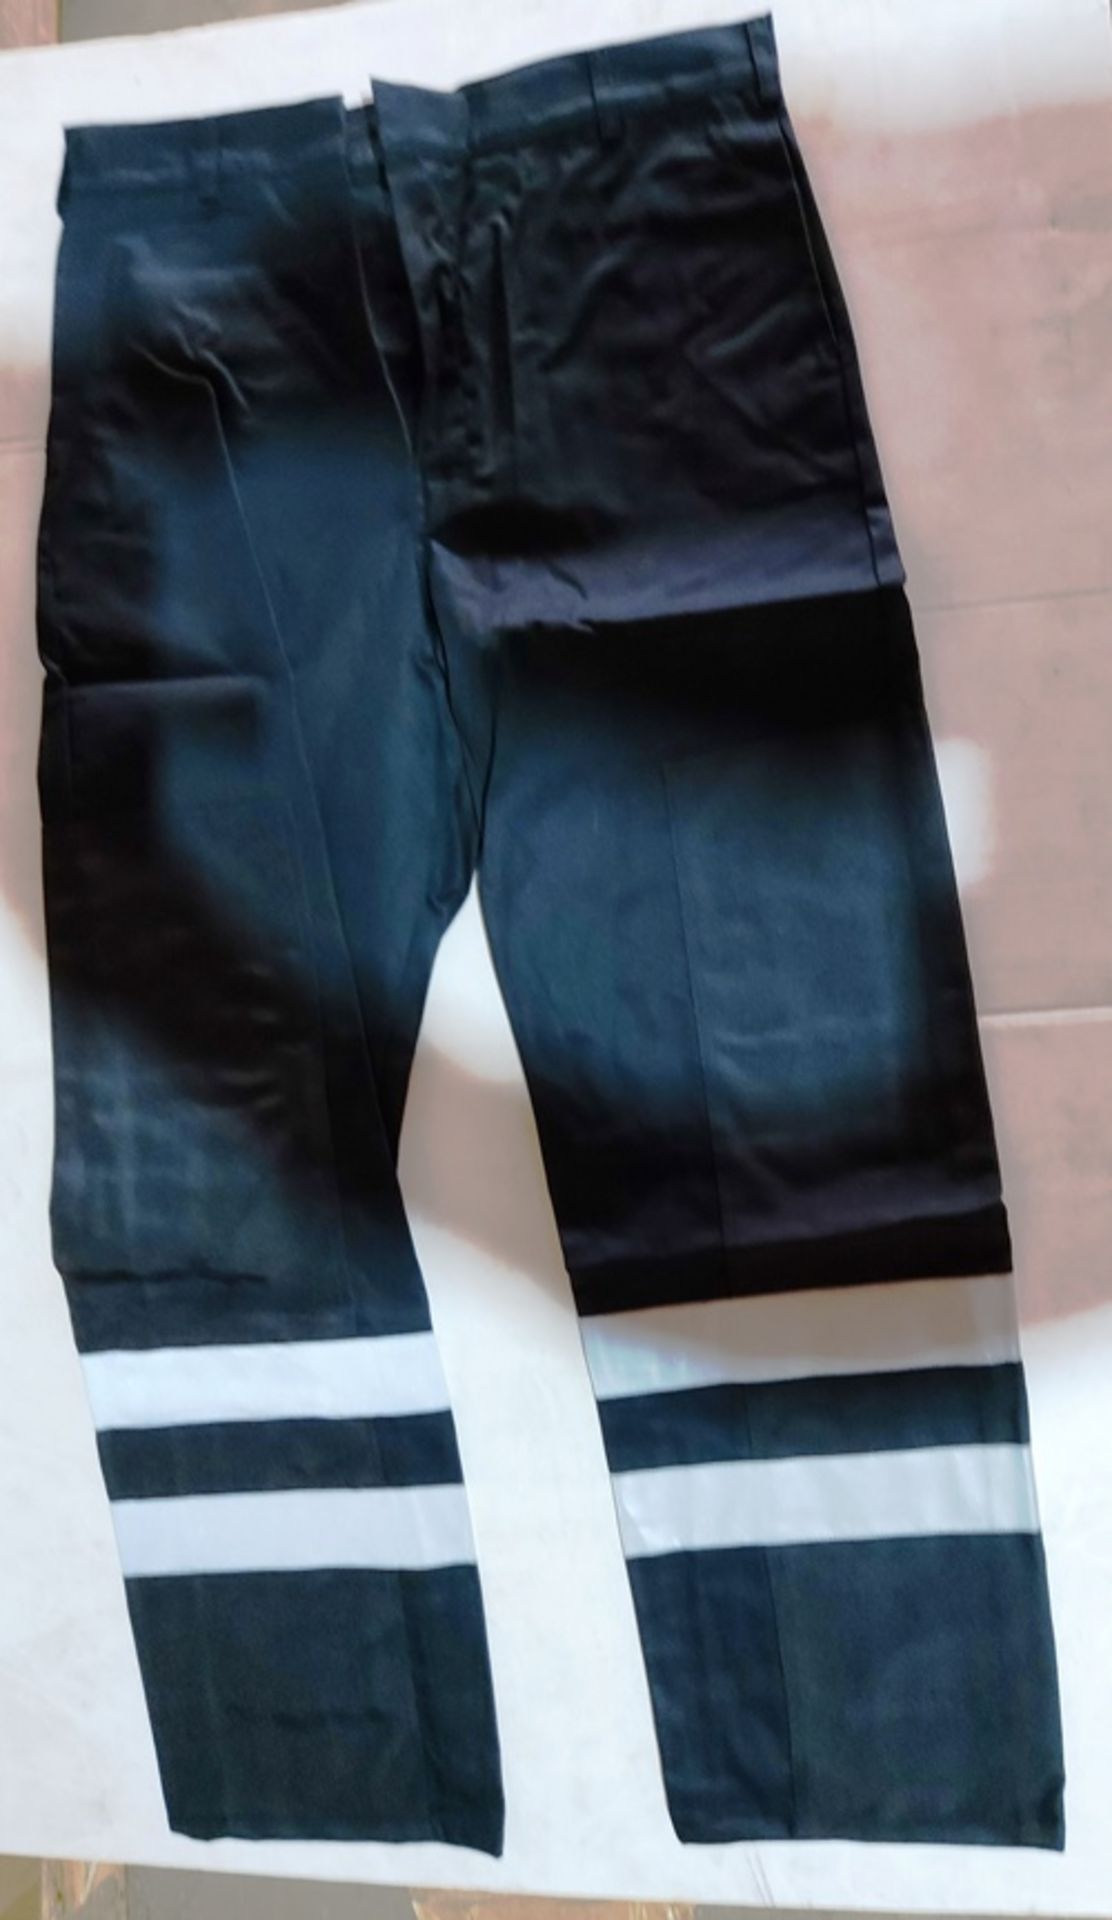 10 x Black ballistic trousers in size 36 regular new in original packaging - Image 2 of 2